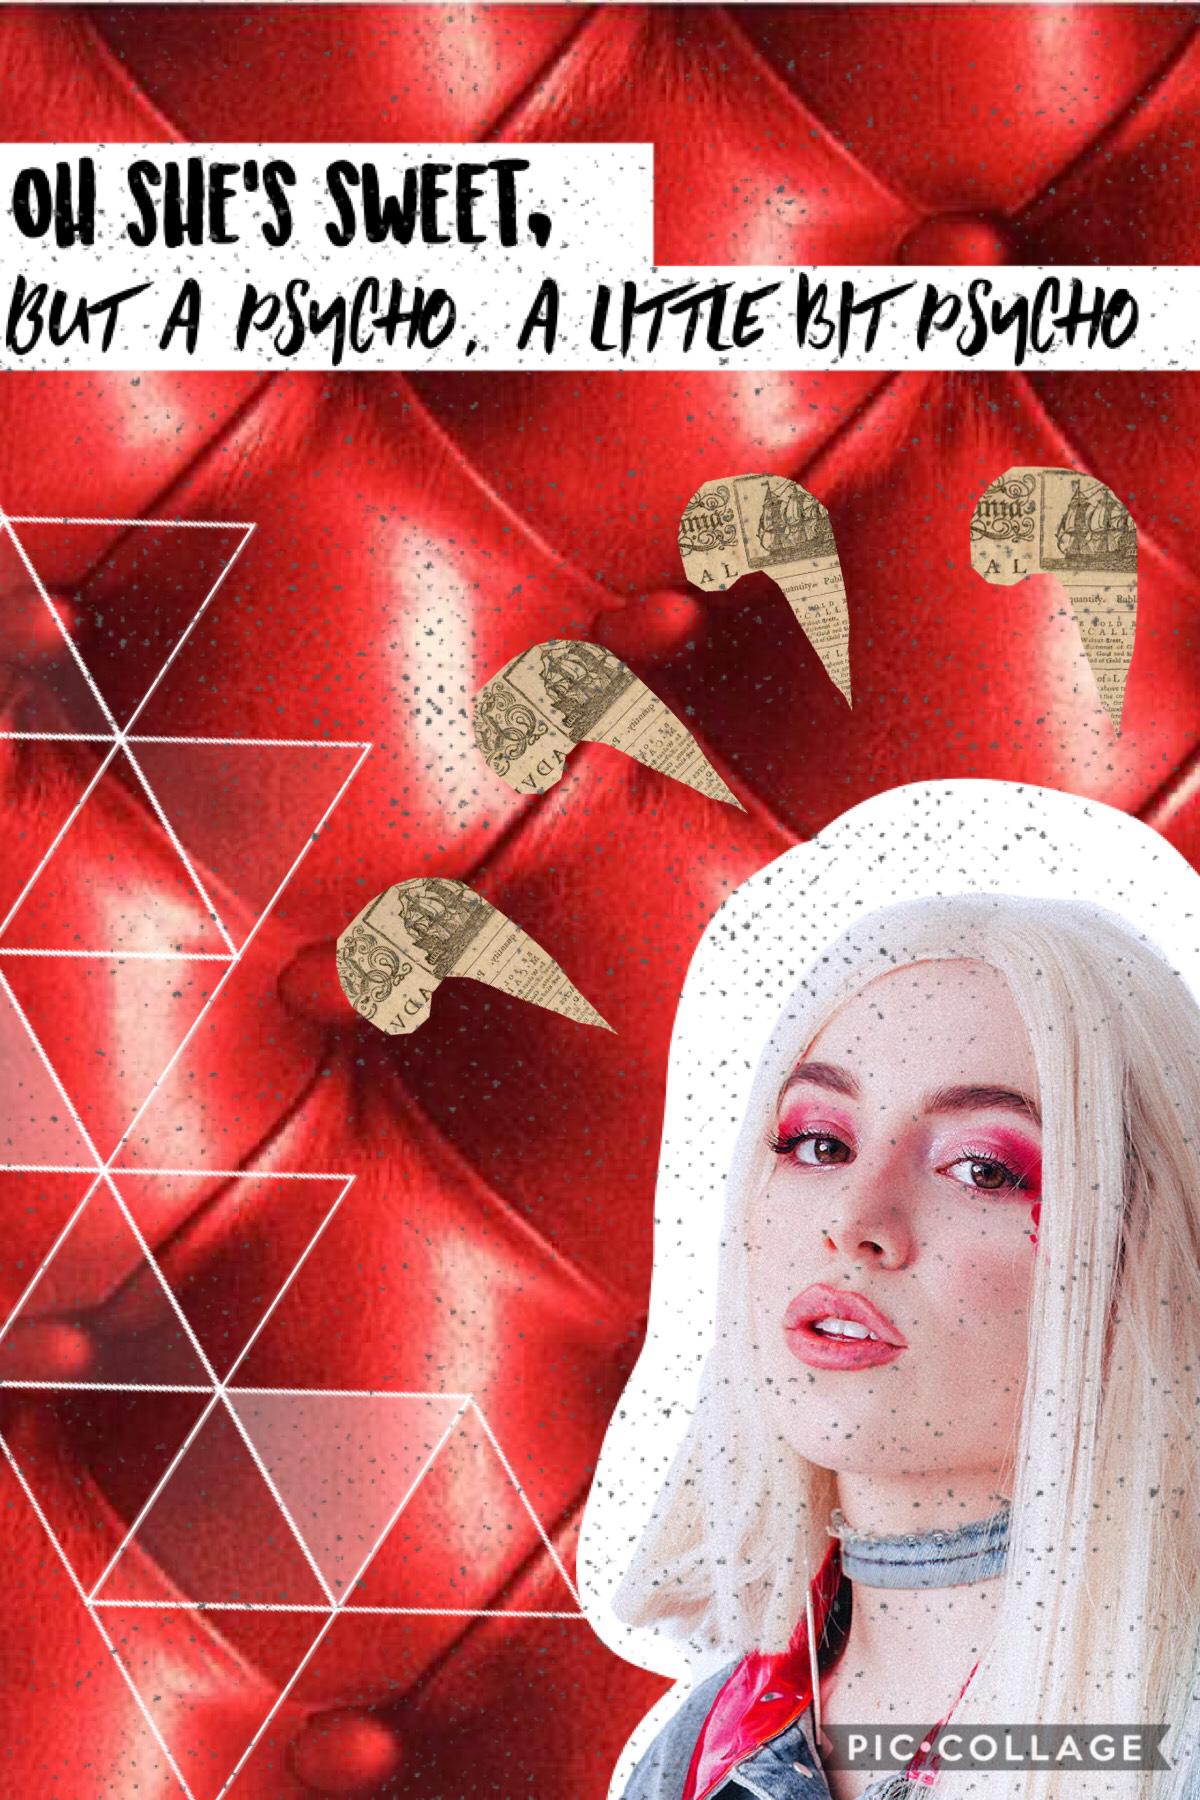 Sweet but psycho by Ava max